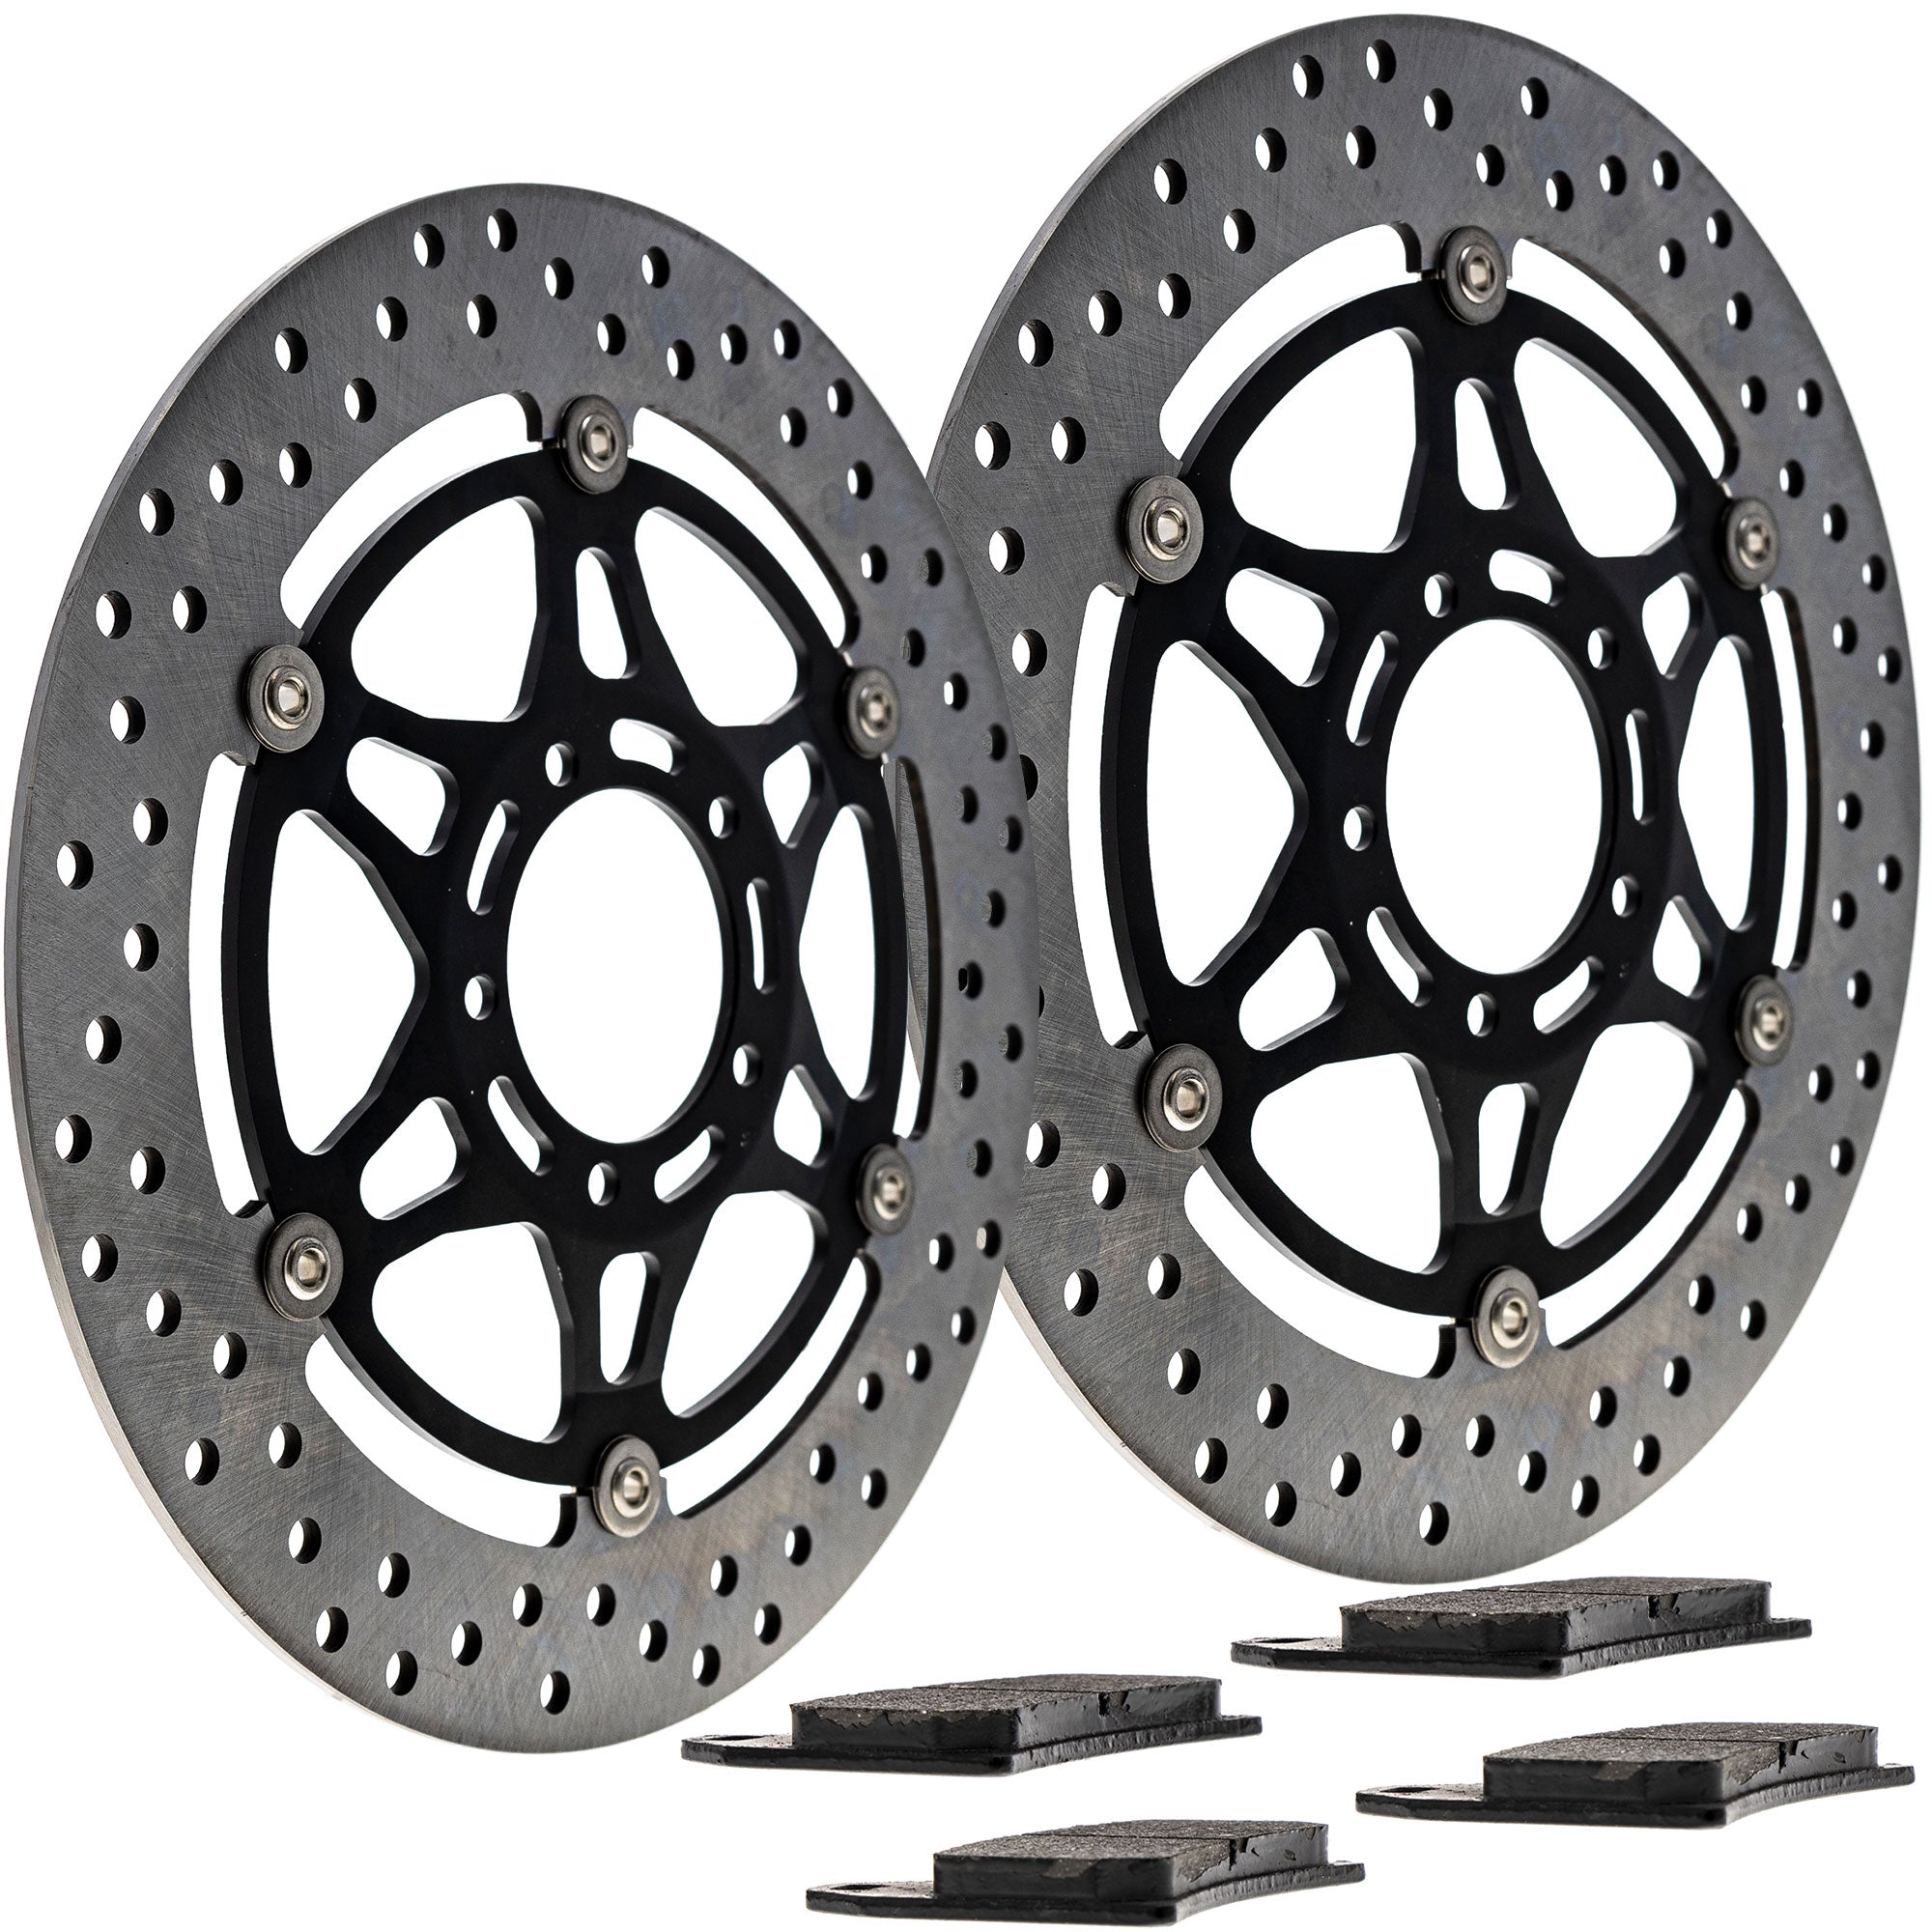 Complete Front or Rear Pad and Rotor Set for zOTHER Victory Triumph KTM Harley Davidson NICHE MK1006898